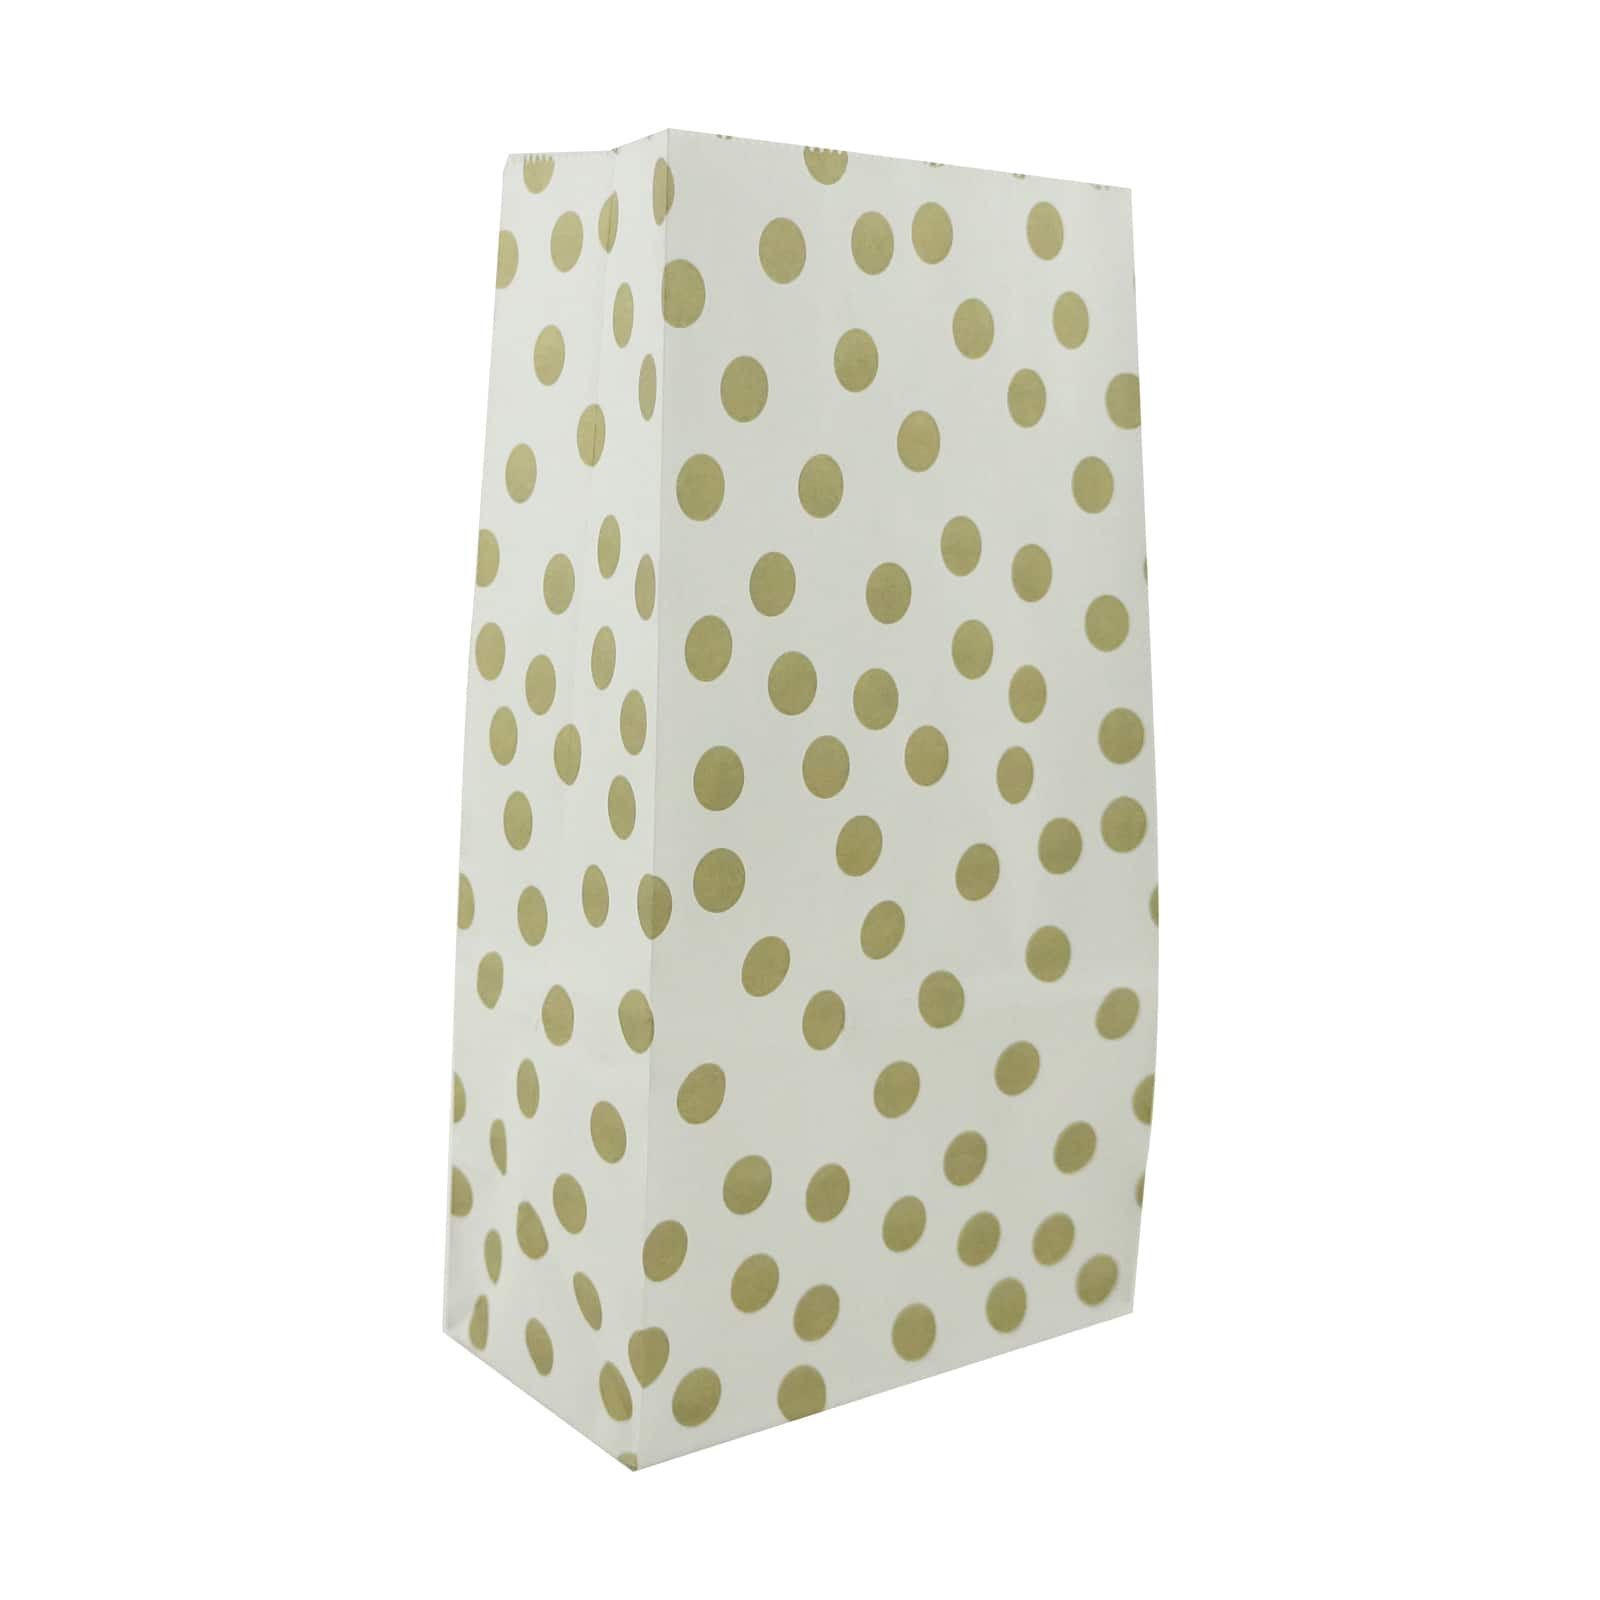 12 Packs: 12 ct. (144 total) White &#x26; Gold Dot Treat Bags by Celebrate It&#x2122;